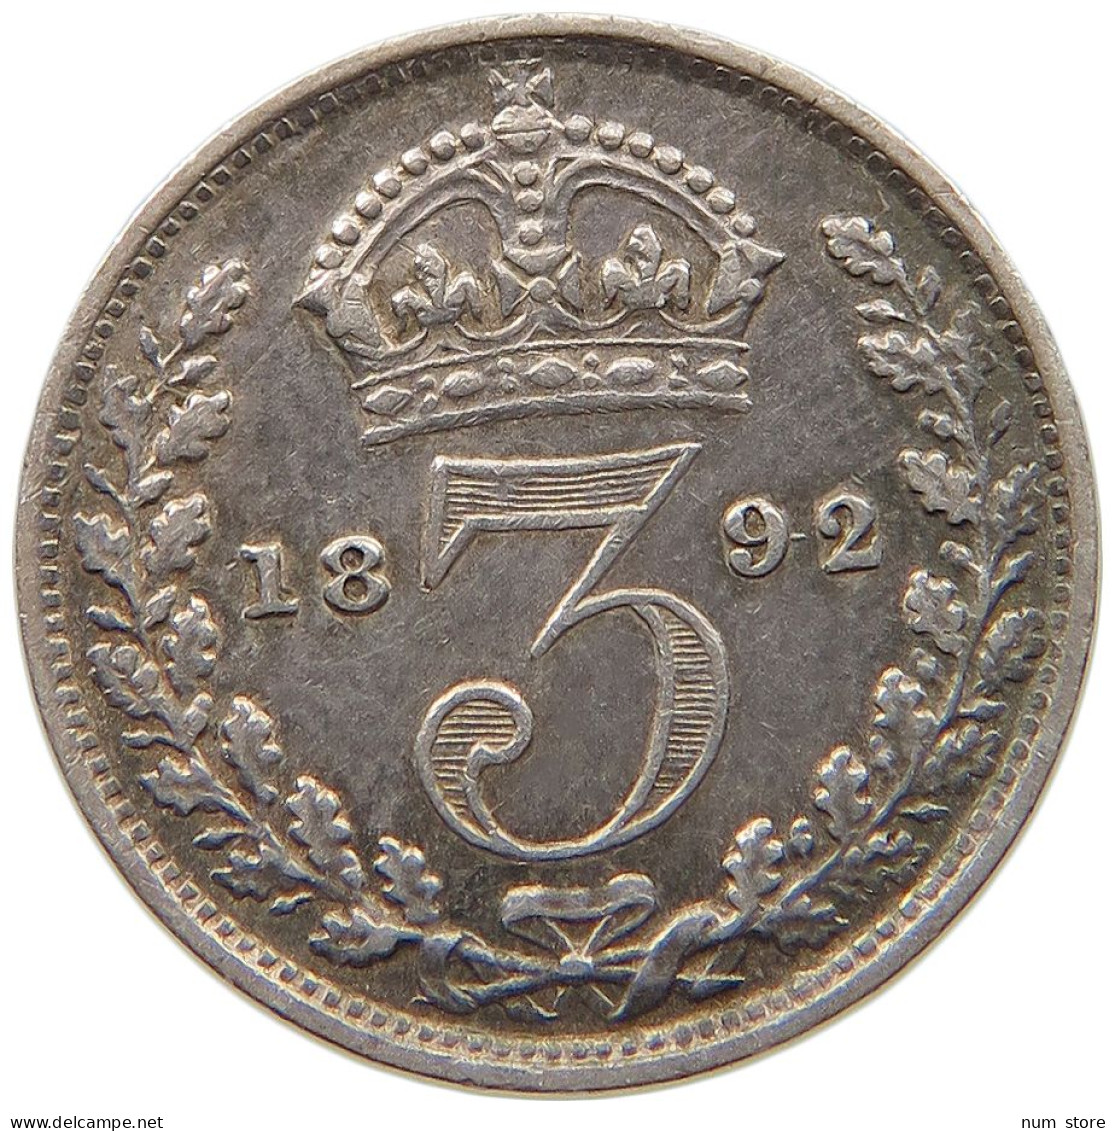 GREAT BRITAIN THREEPENCE 1892 Victoria 1837-1901 #t114 0117 - F. 3 Pence